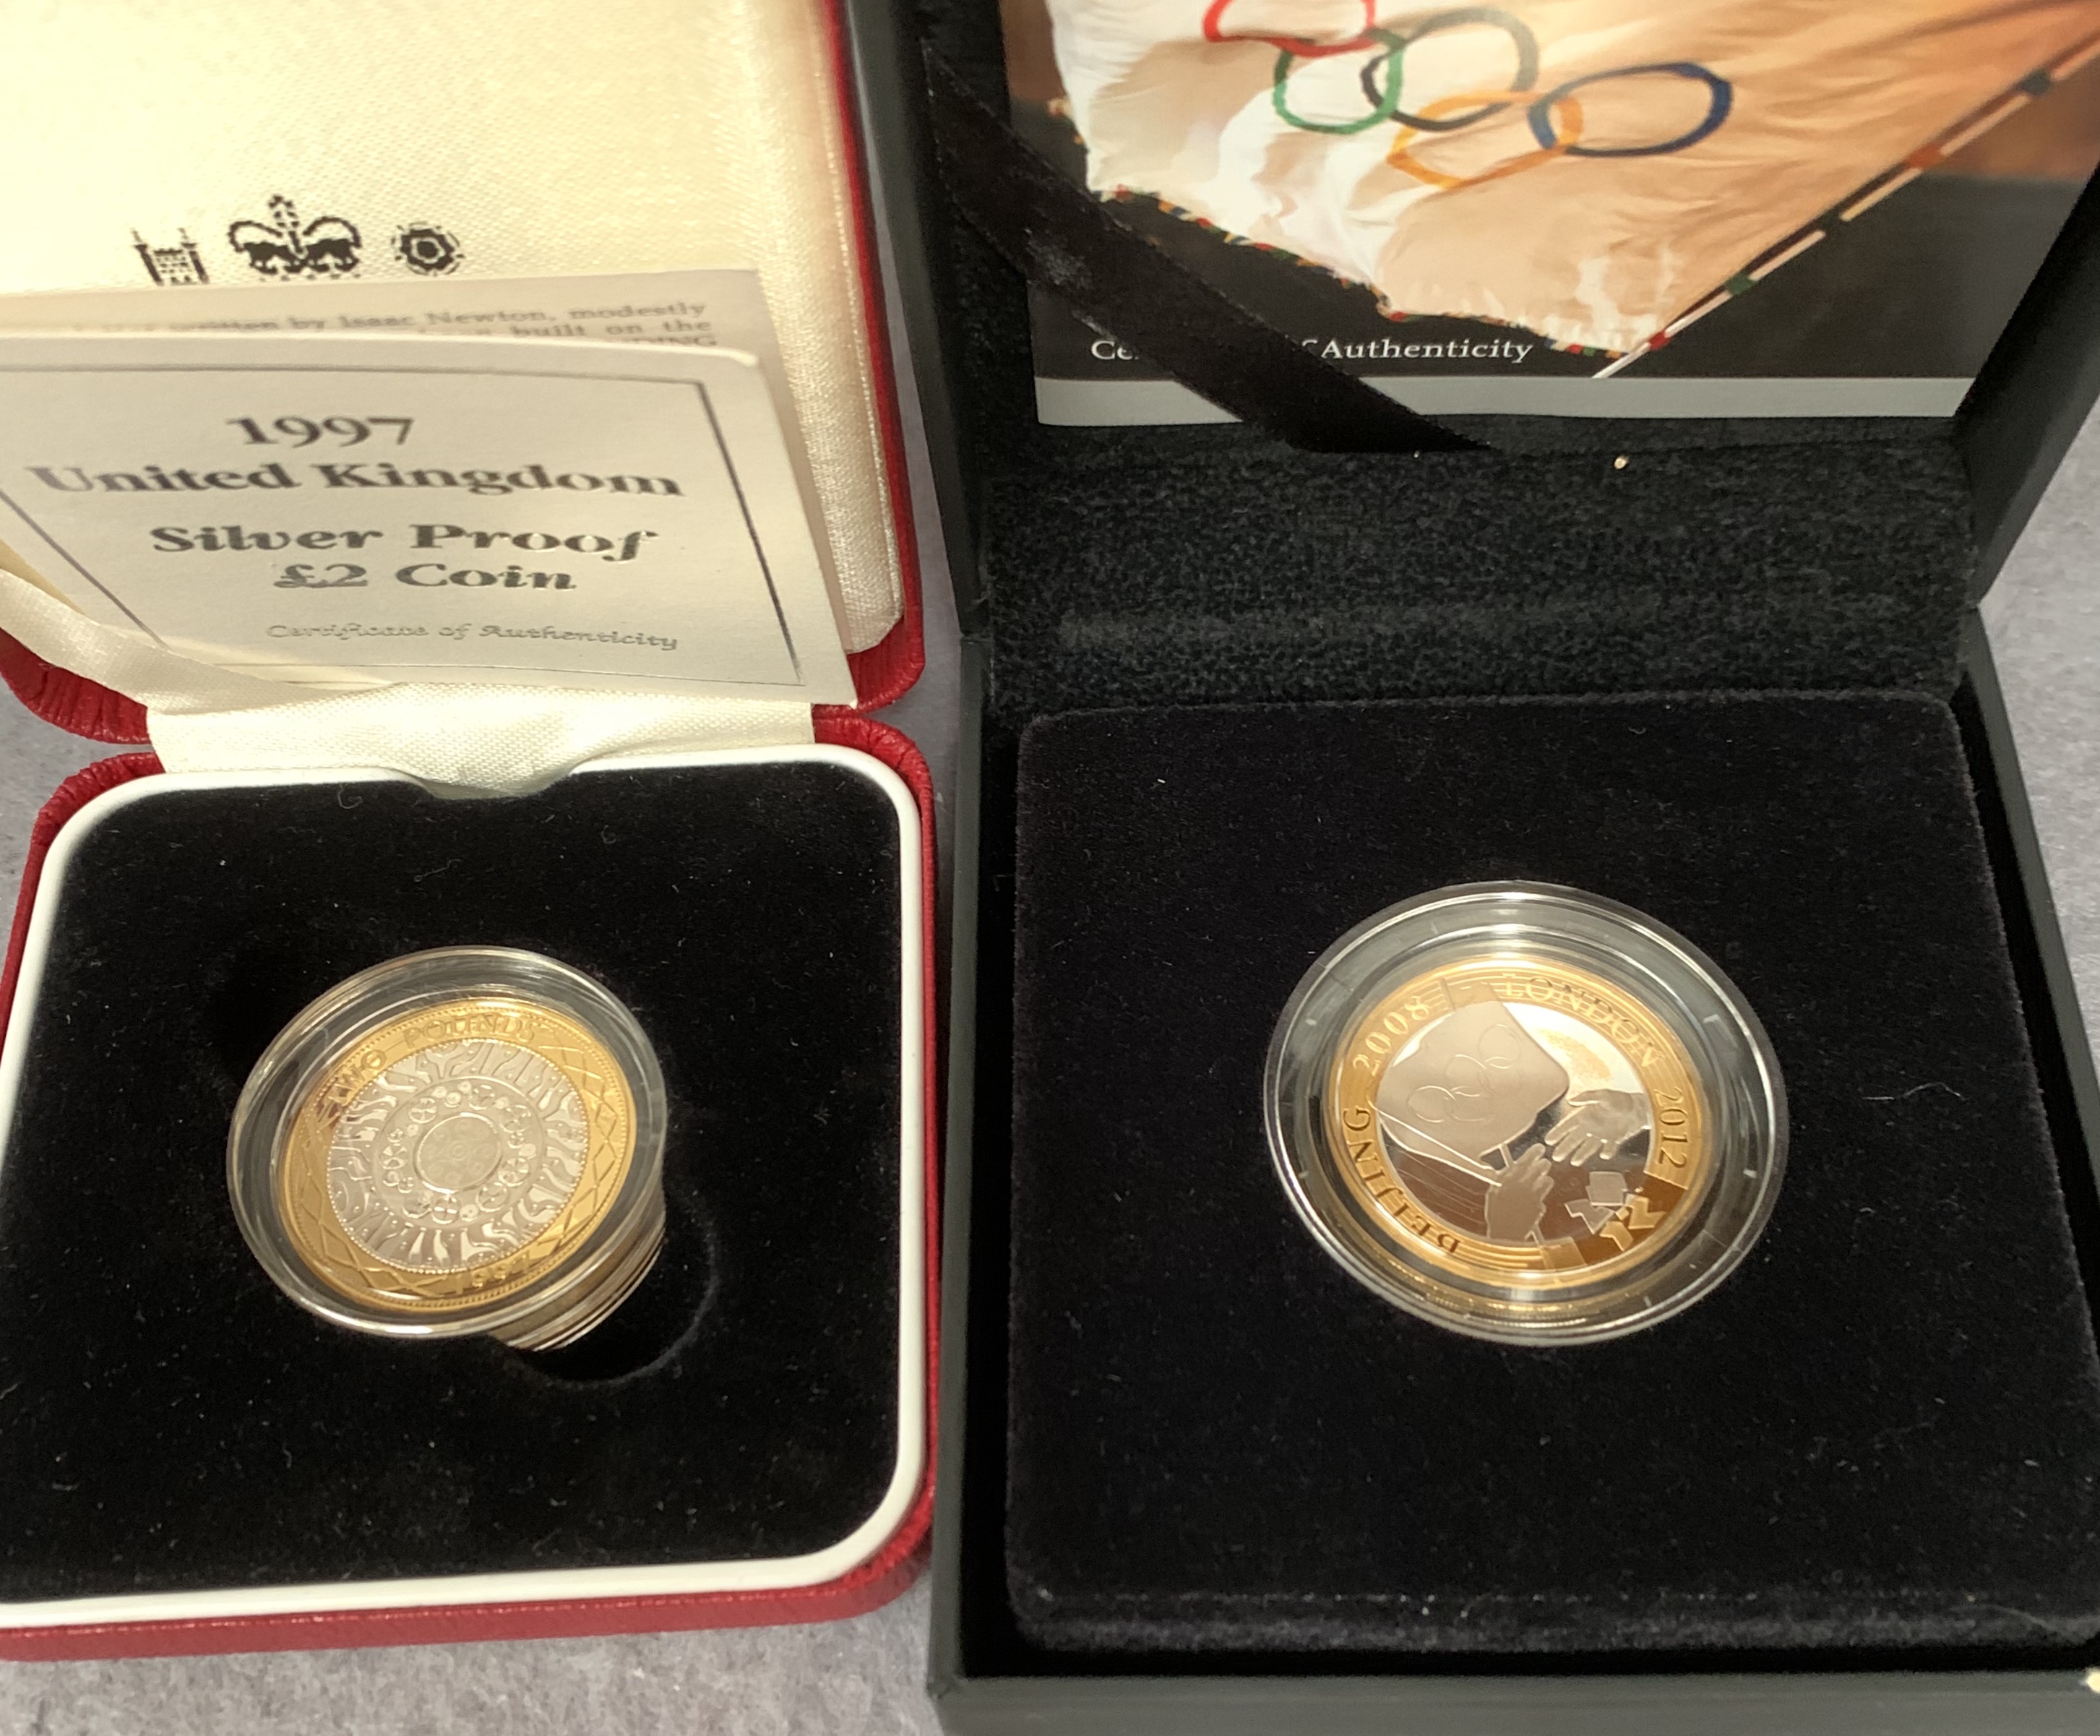 A Royal Mint 2008 UK Olympic Games Handover Ceremony silver proof £2 coin in case complete with - Image 2 of 2